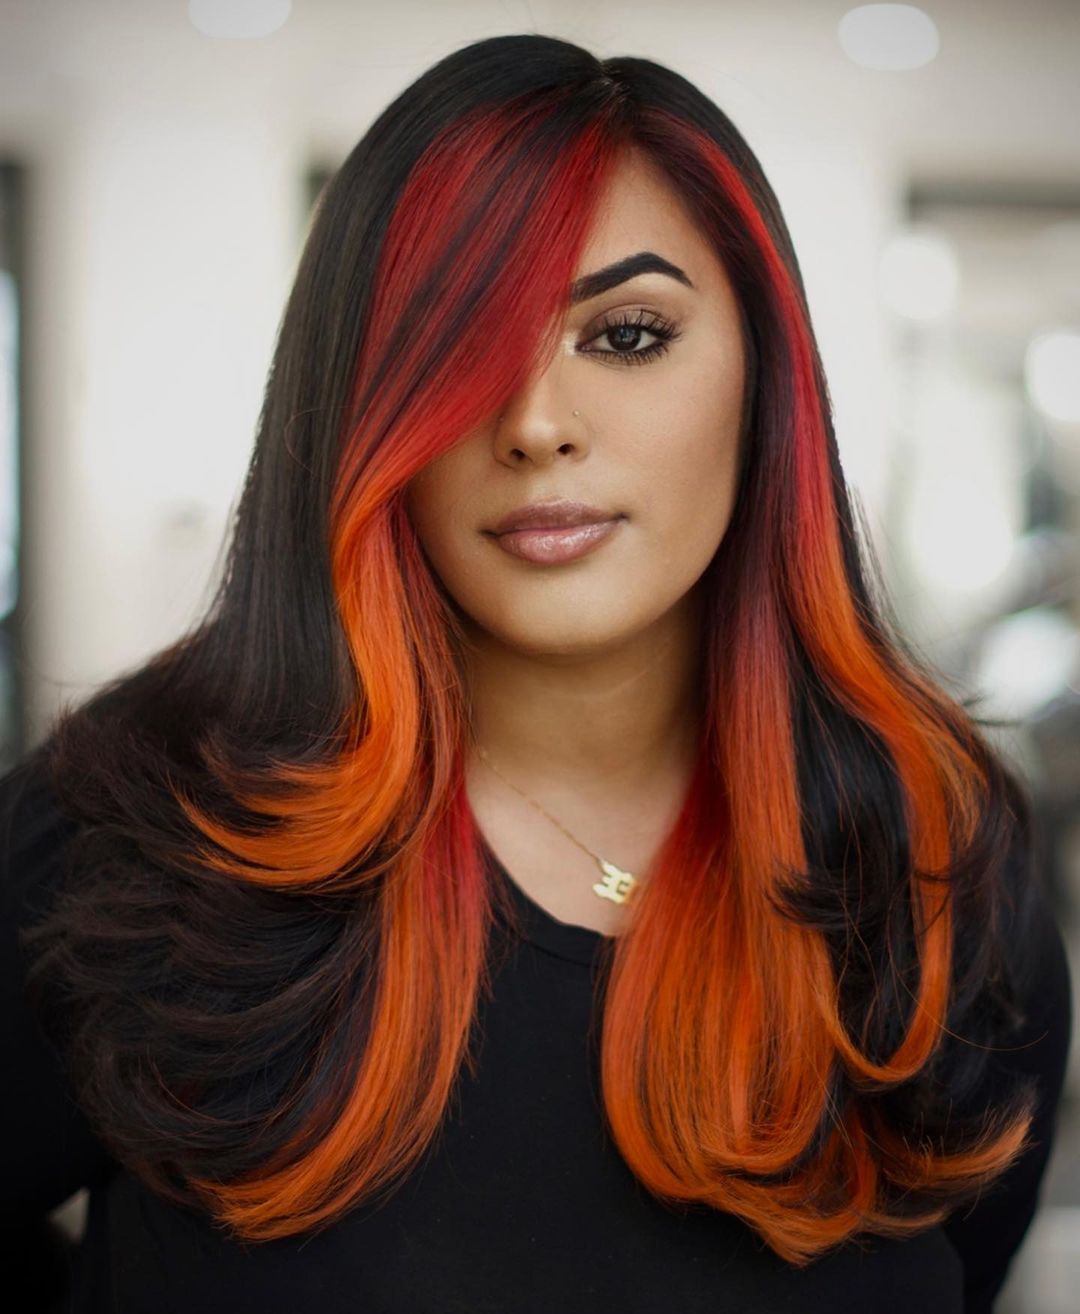 Black and Orange Combo on Long Straight Hair